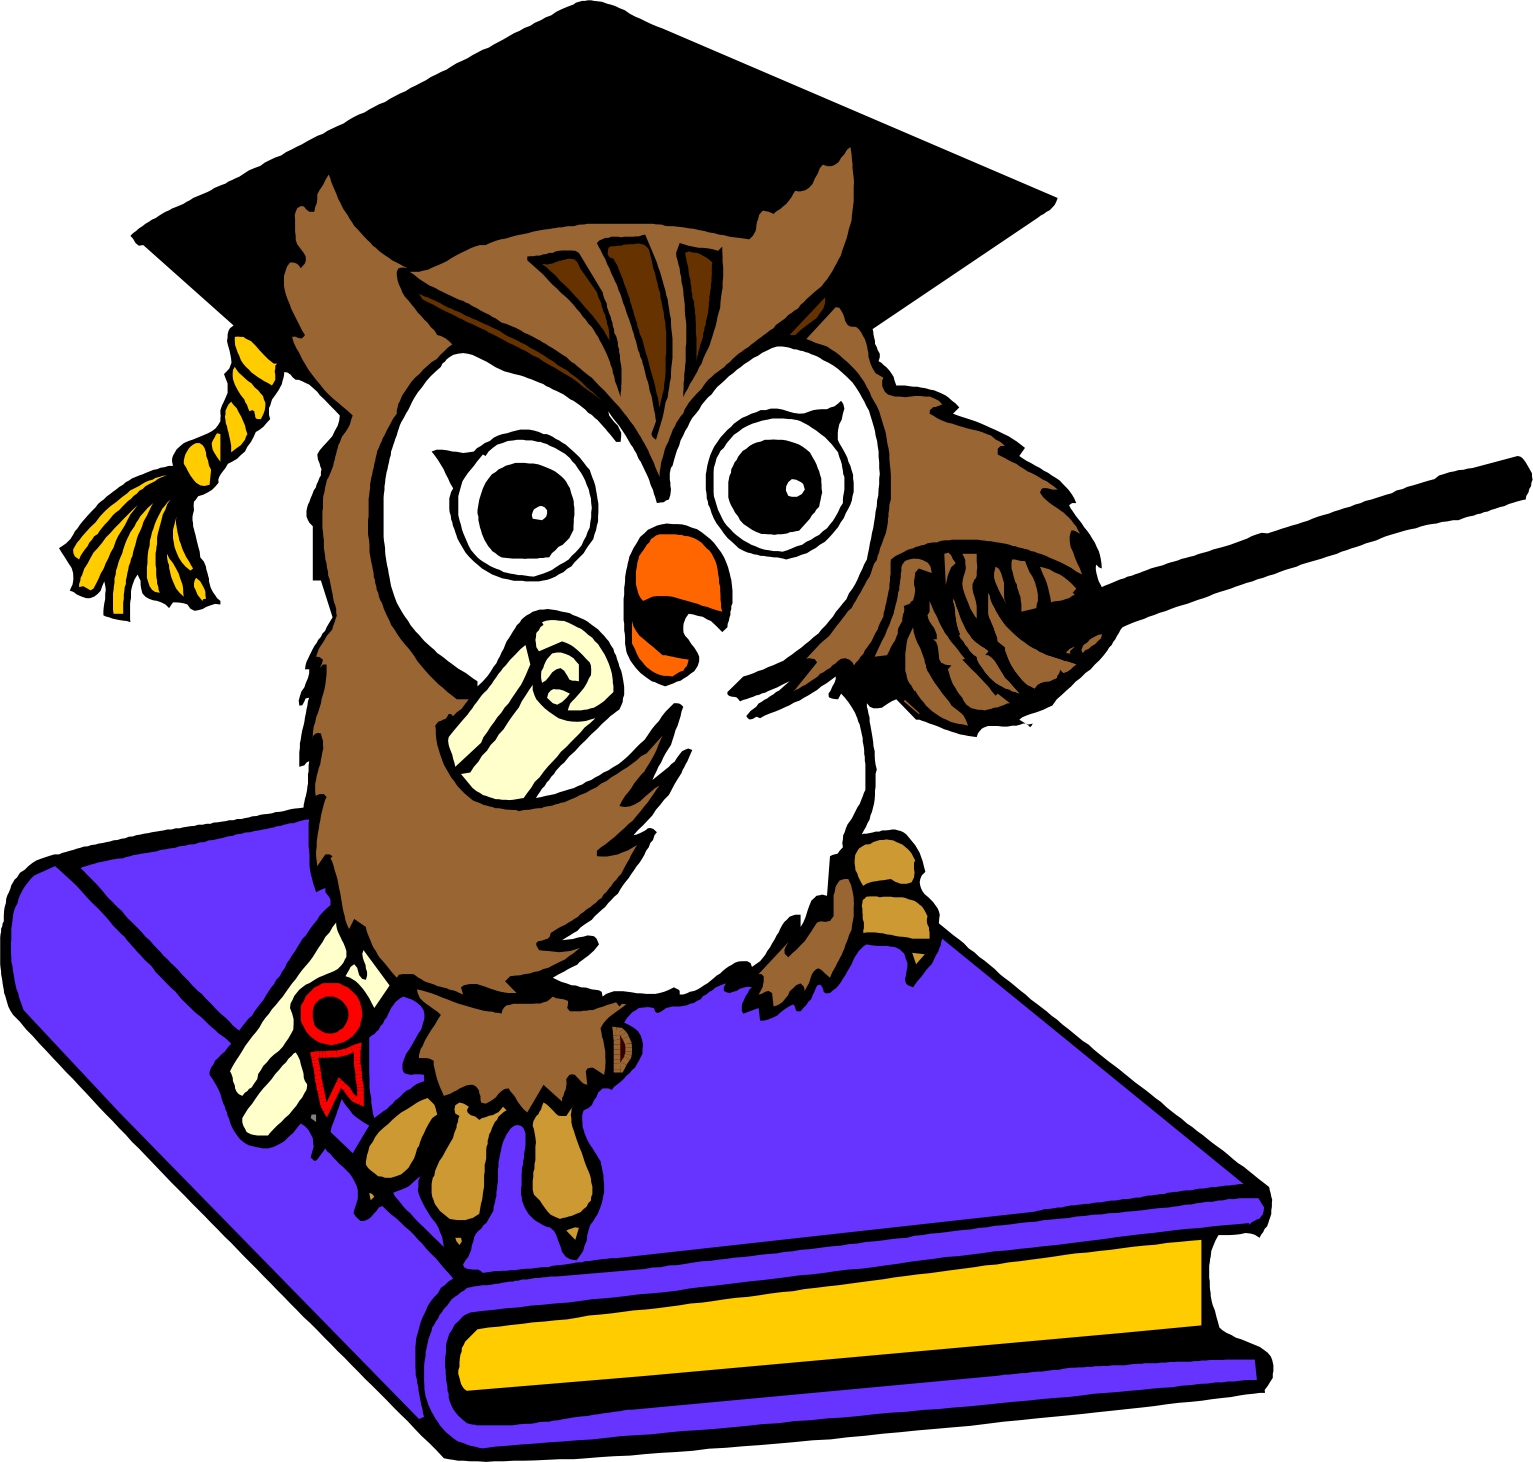 Wallpaper Computer Screen Background Education Owl - Cartoon Pictures Of  Education - 1533x1462 Wallpaper 